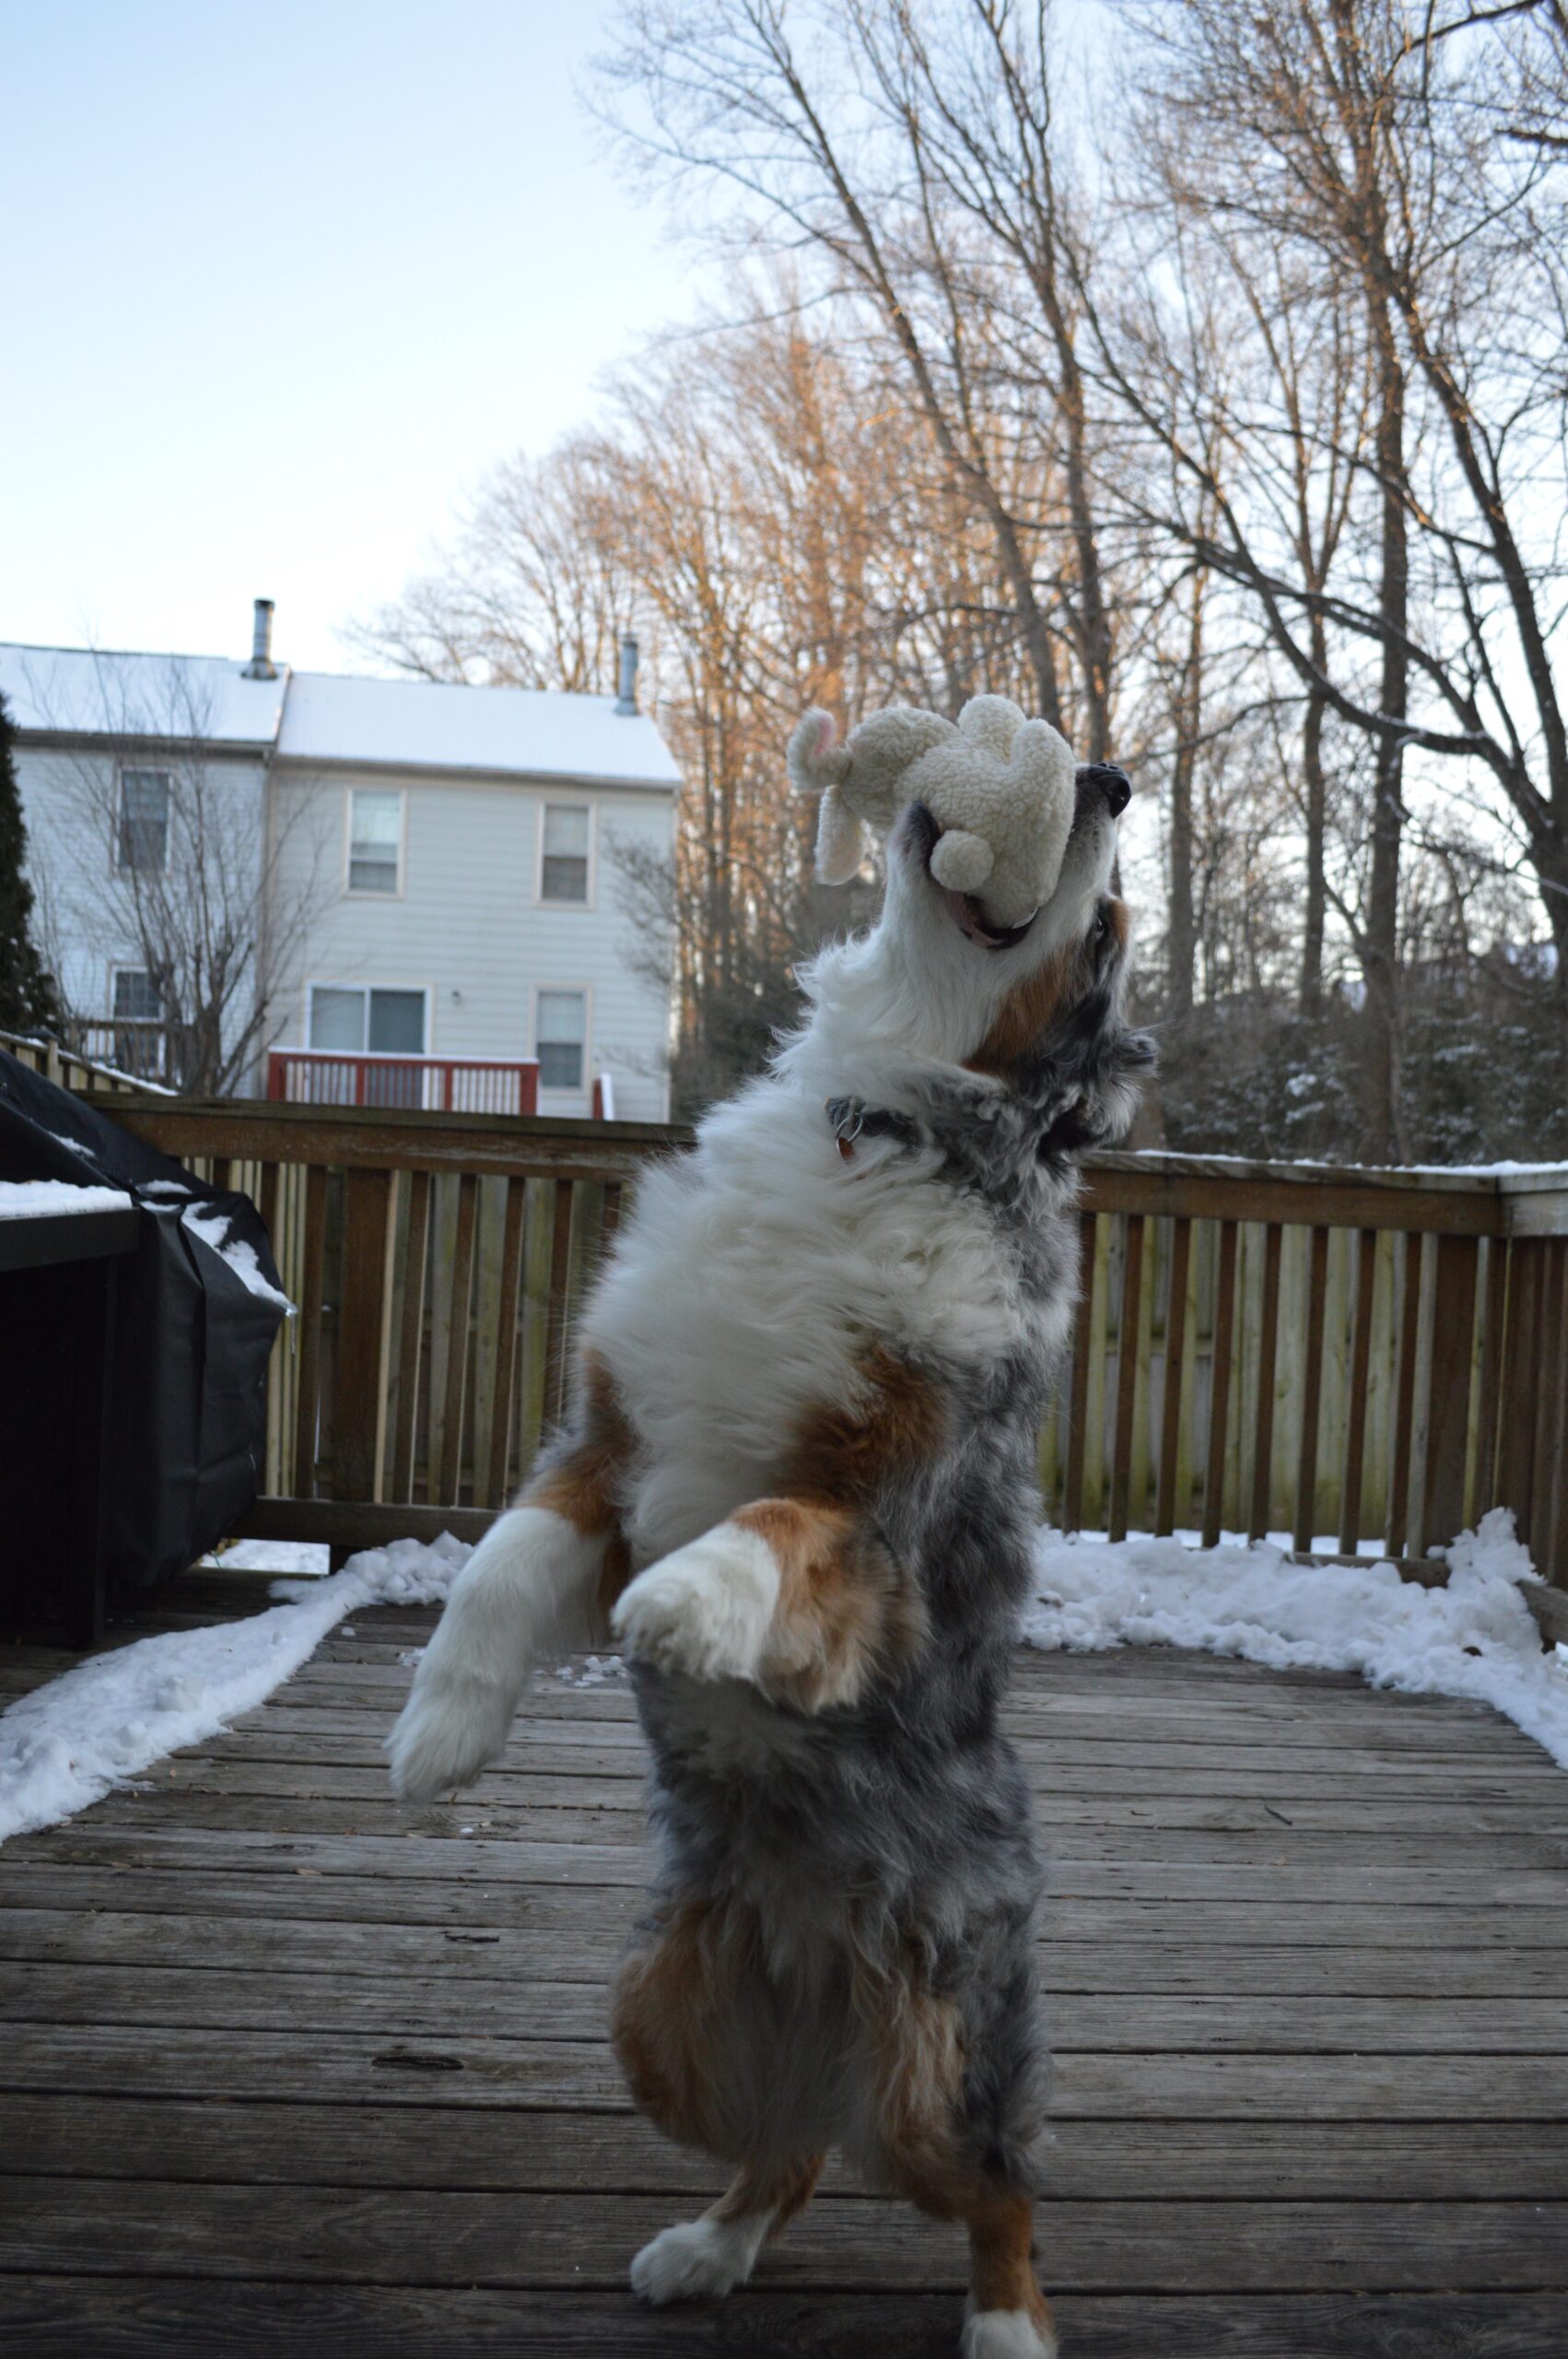 Australian shepherd jumping up on two back paws to catch a white, bunny shaped stuffed animal.